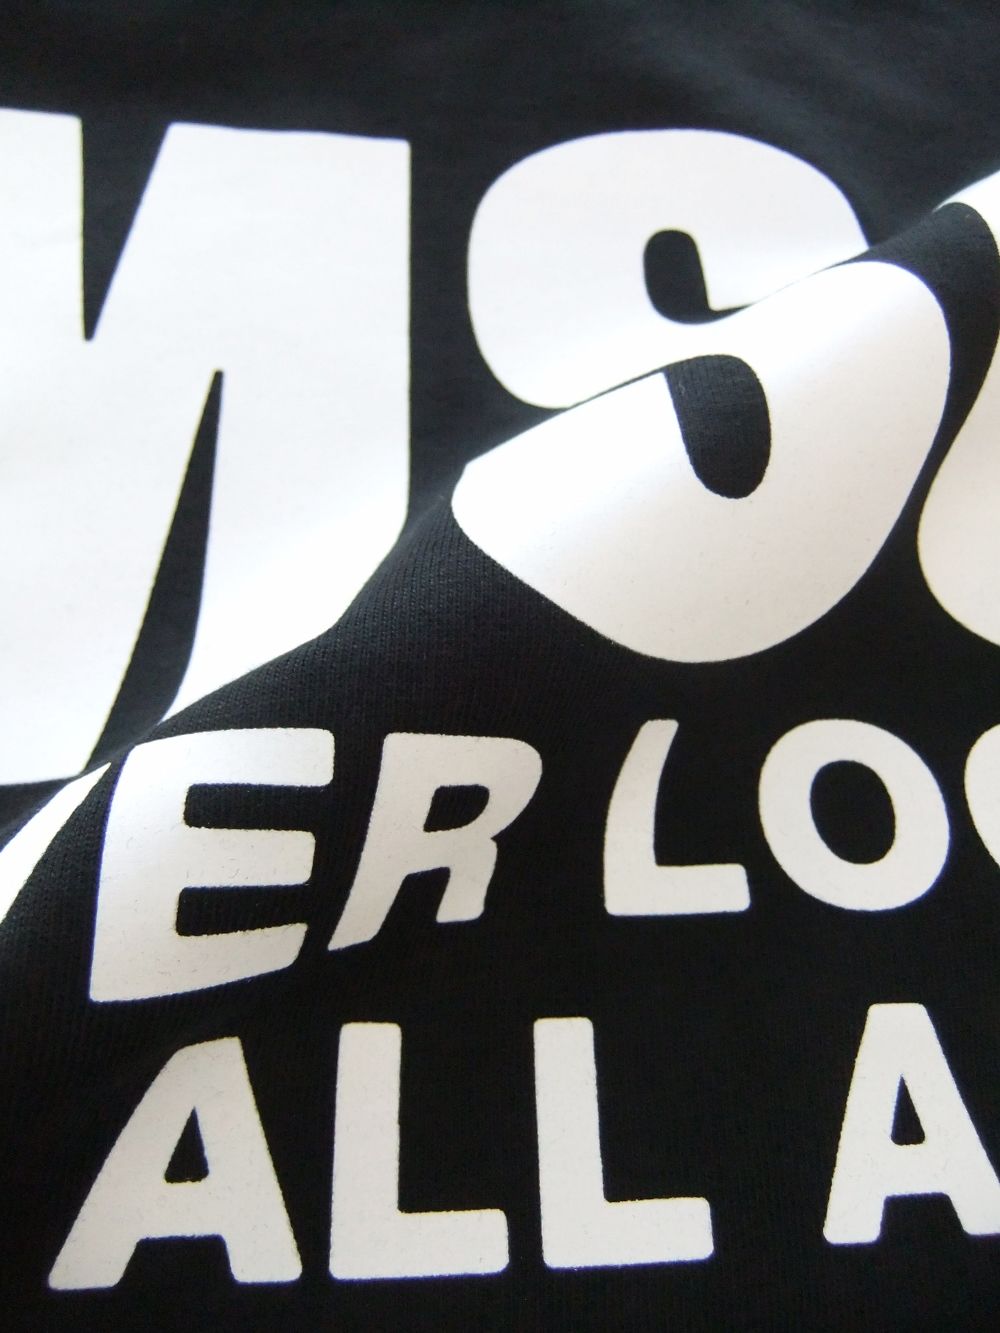 MSGM - 《LADIES》 NEVER LOOK BACK ステートメント ロゴ Tシャツ